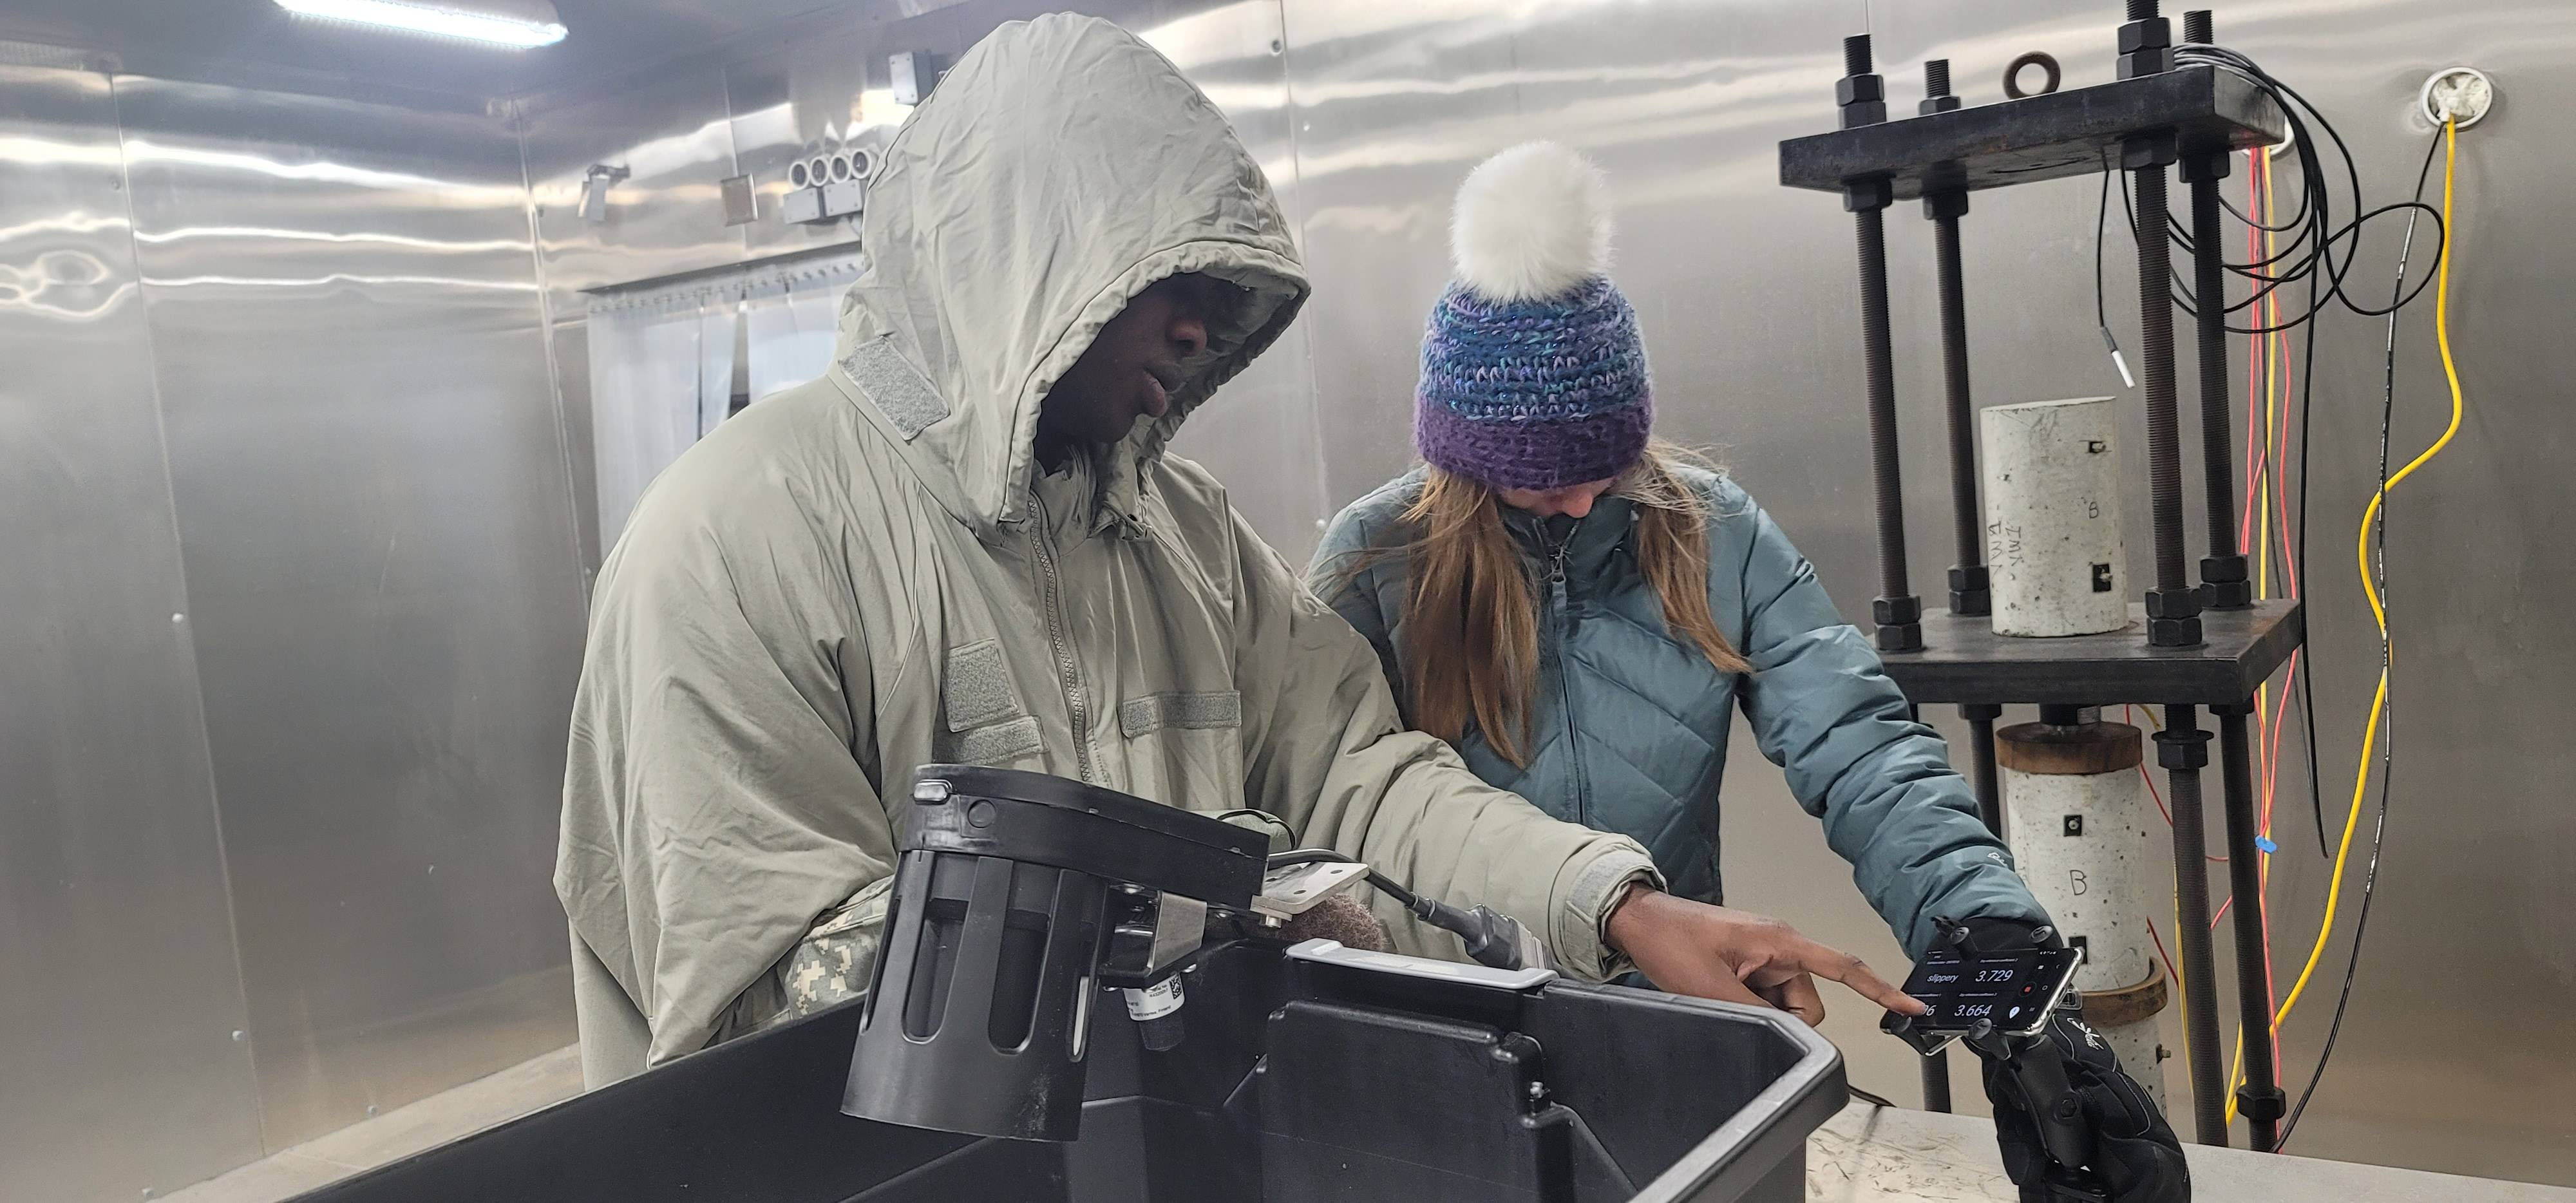 Lindy Guernsey and fellow X-Force team member work in -40 degree F conditions inside the cold chamber.  Photo by Artsiom Studzianok.